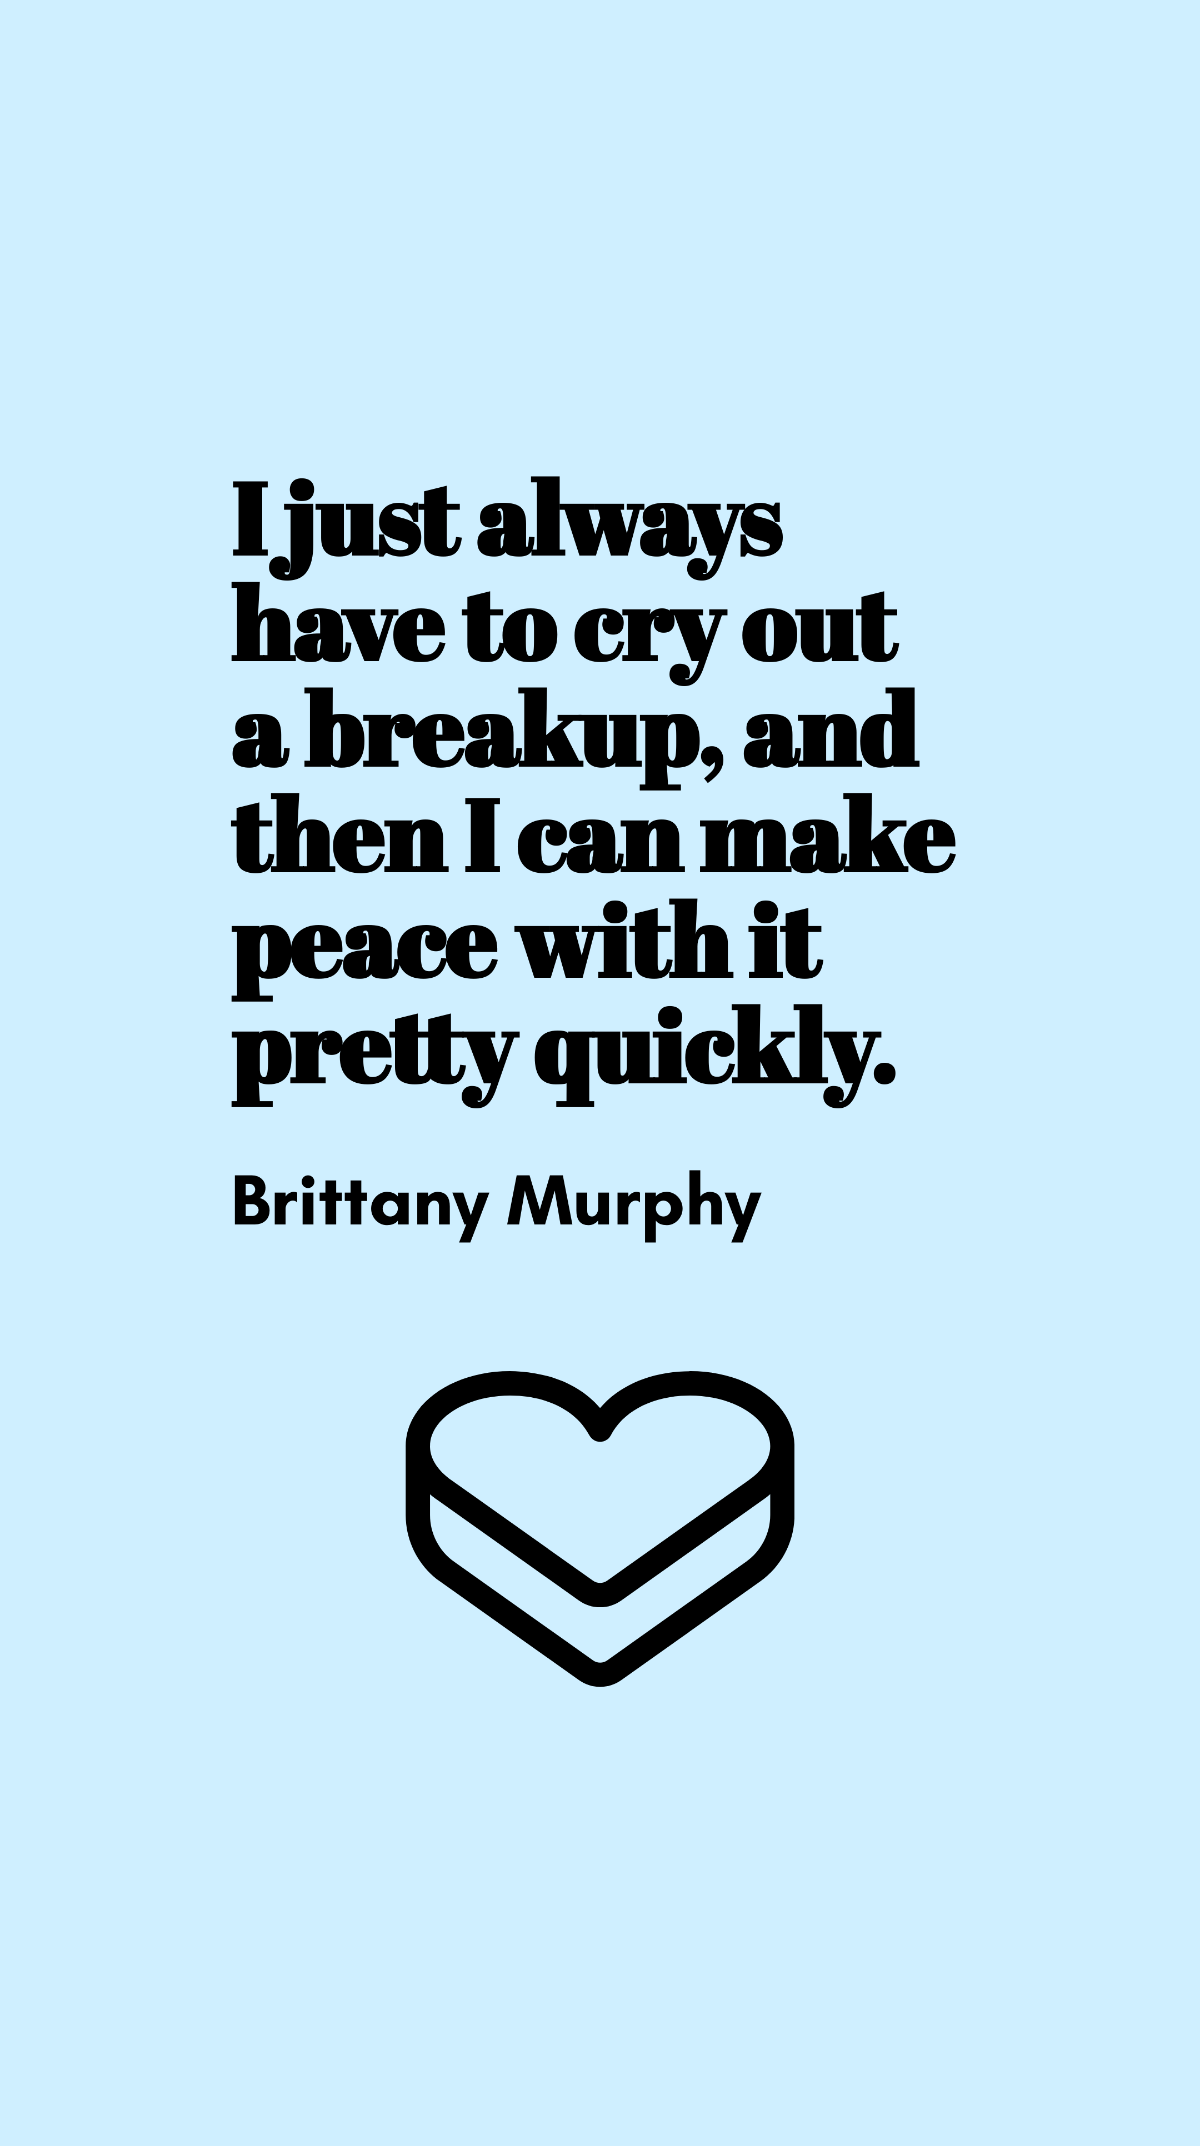 Free Brittany Murphy - I just always have to cry out a breakup, and then I can make peace with it pretty quickly. Template